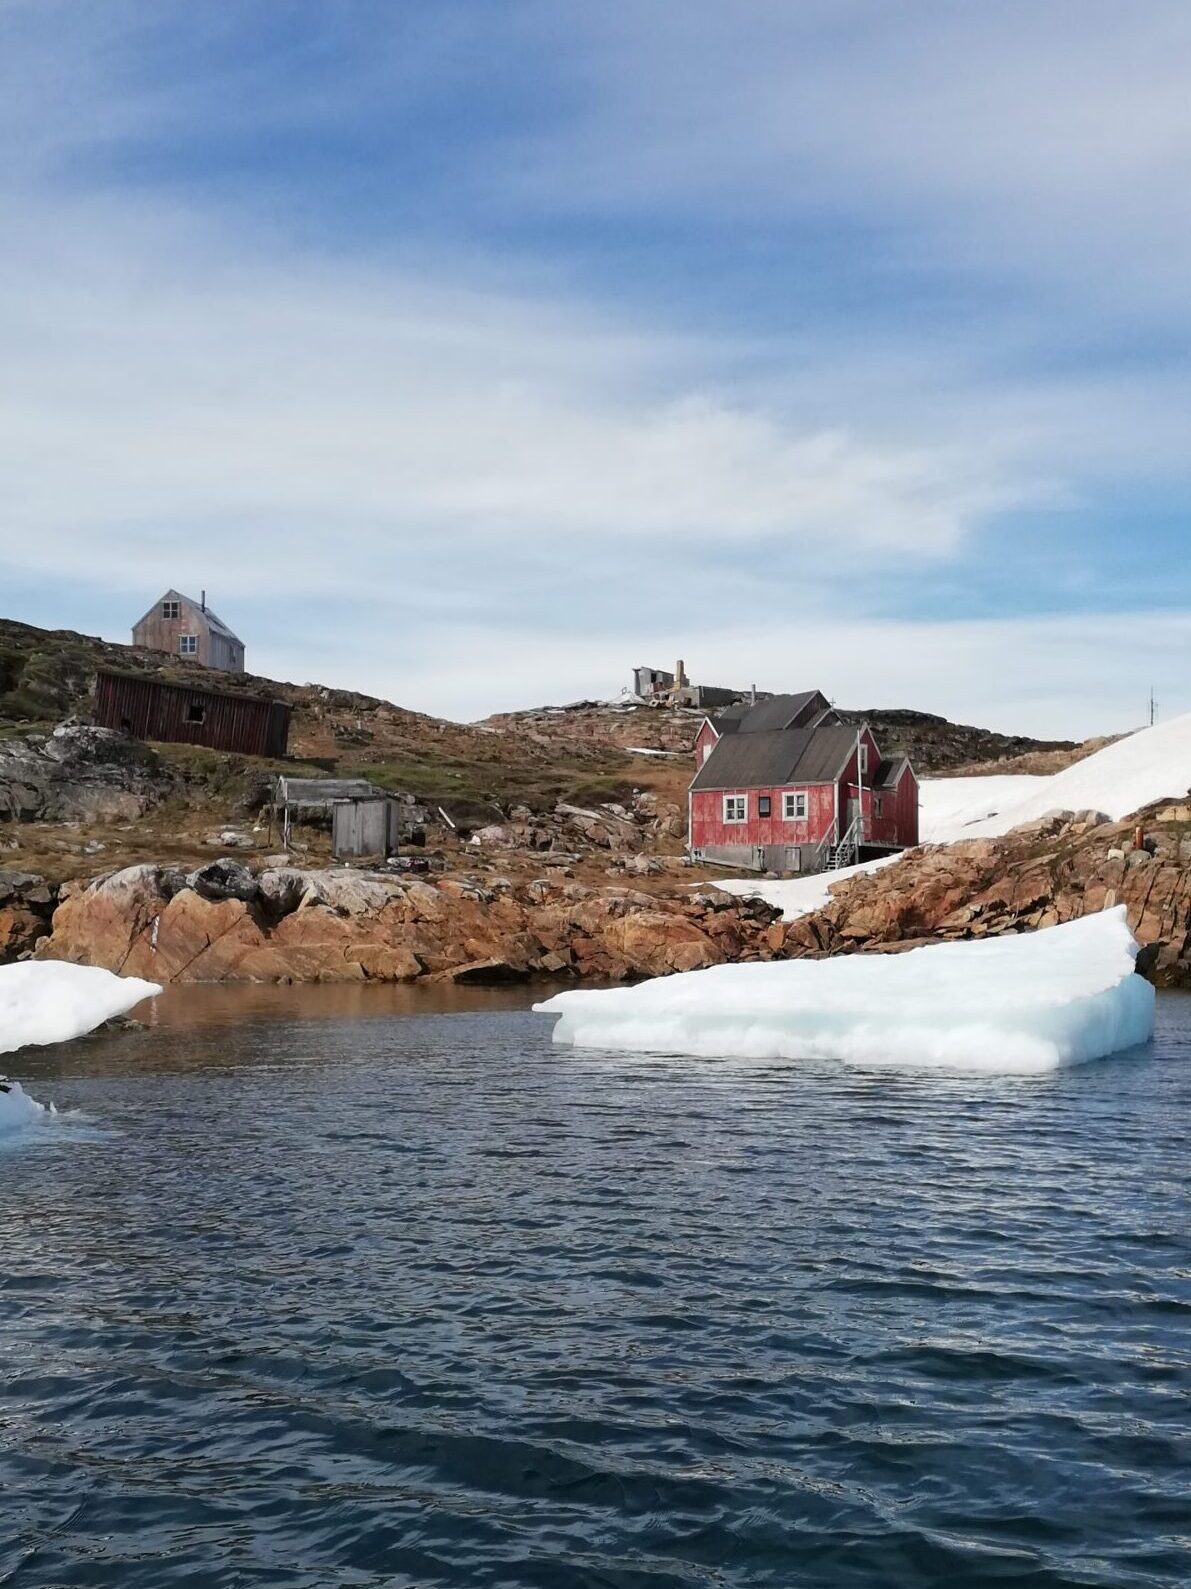 Arrival to the abandoned settlemend Ikateq. Photo by Anna Burdenski - Visit East Greenland